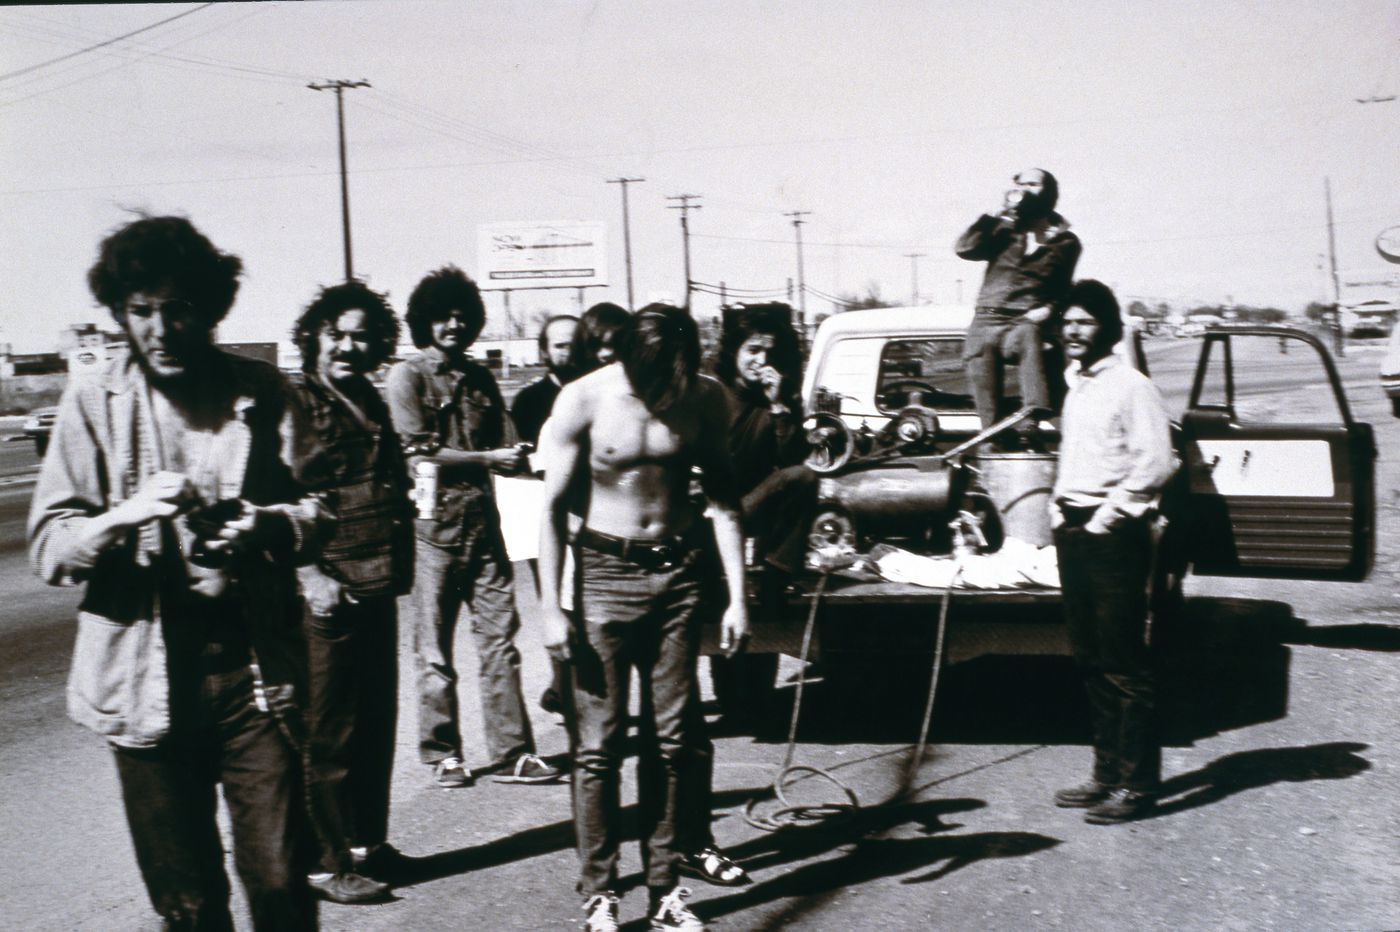 Photograph of students and truck for Red Line